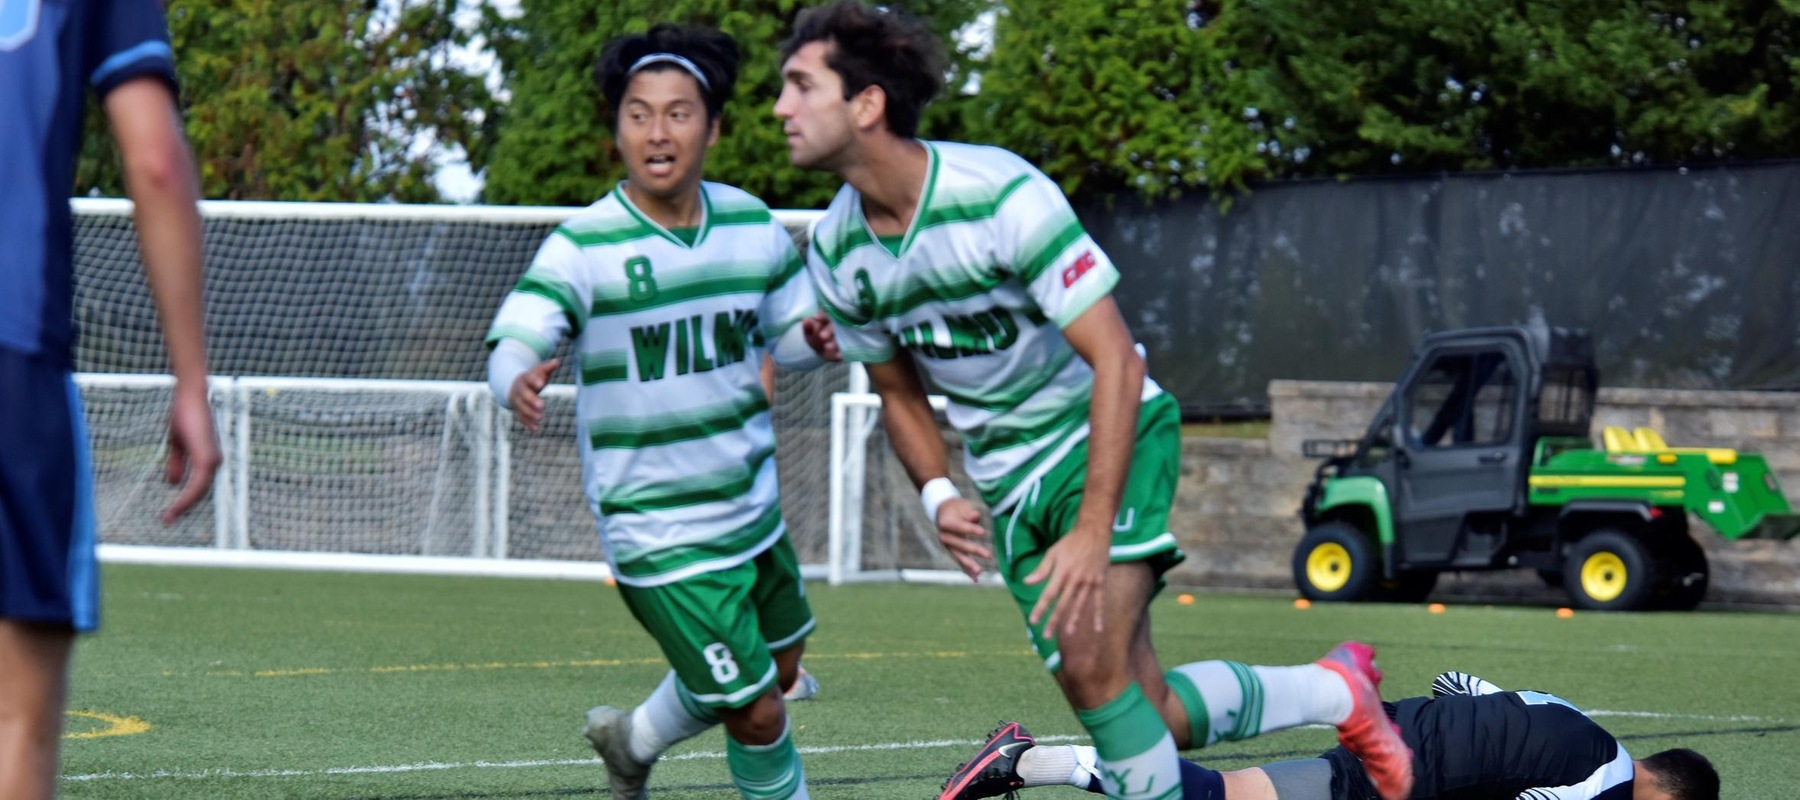 Photo of Pol Romero after scoring the game-winning goal in the 83rd minute against Jefferson. Copyright 2022; Wilmington University. All rights reserved. Photo by James Jones. November 1, 2022 vs. Jefferson in CACC Tournament Quarterfinal.